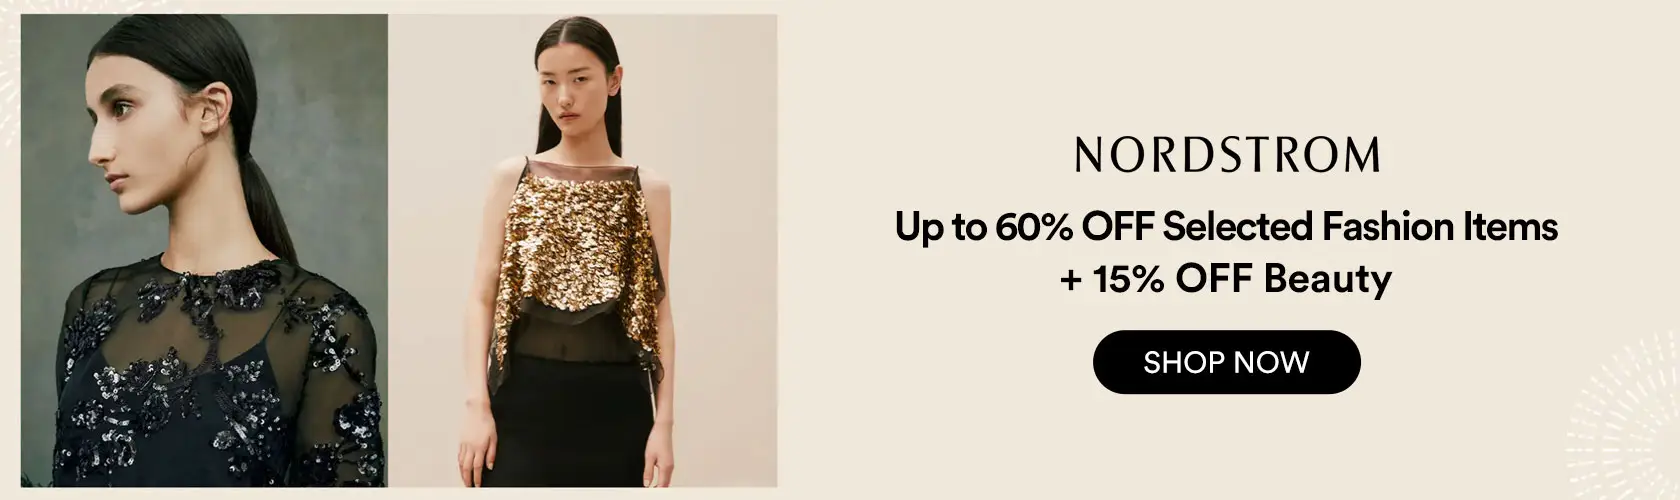 Nordstrom: Up to 60% OFF Selected Fashion Items + 15% OFF Beauty